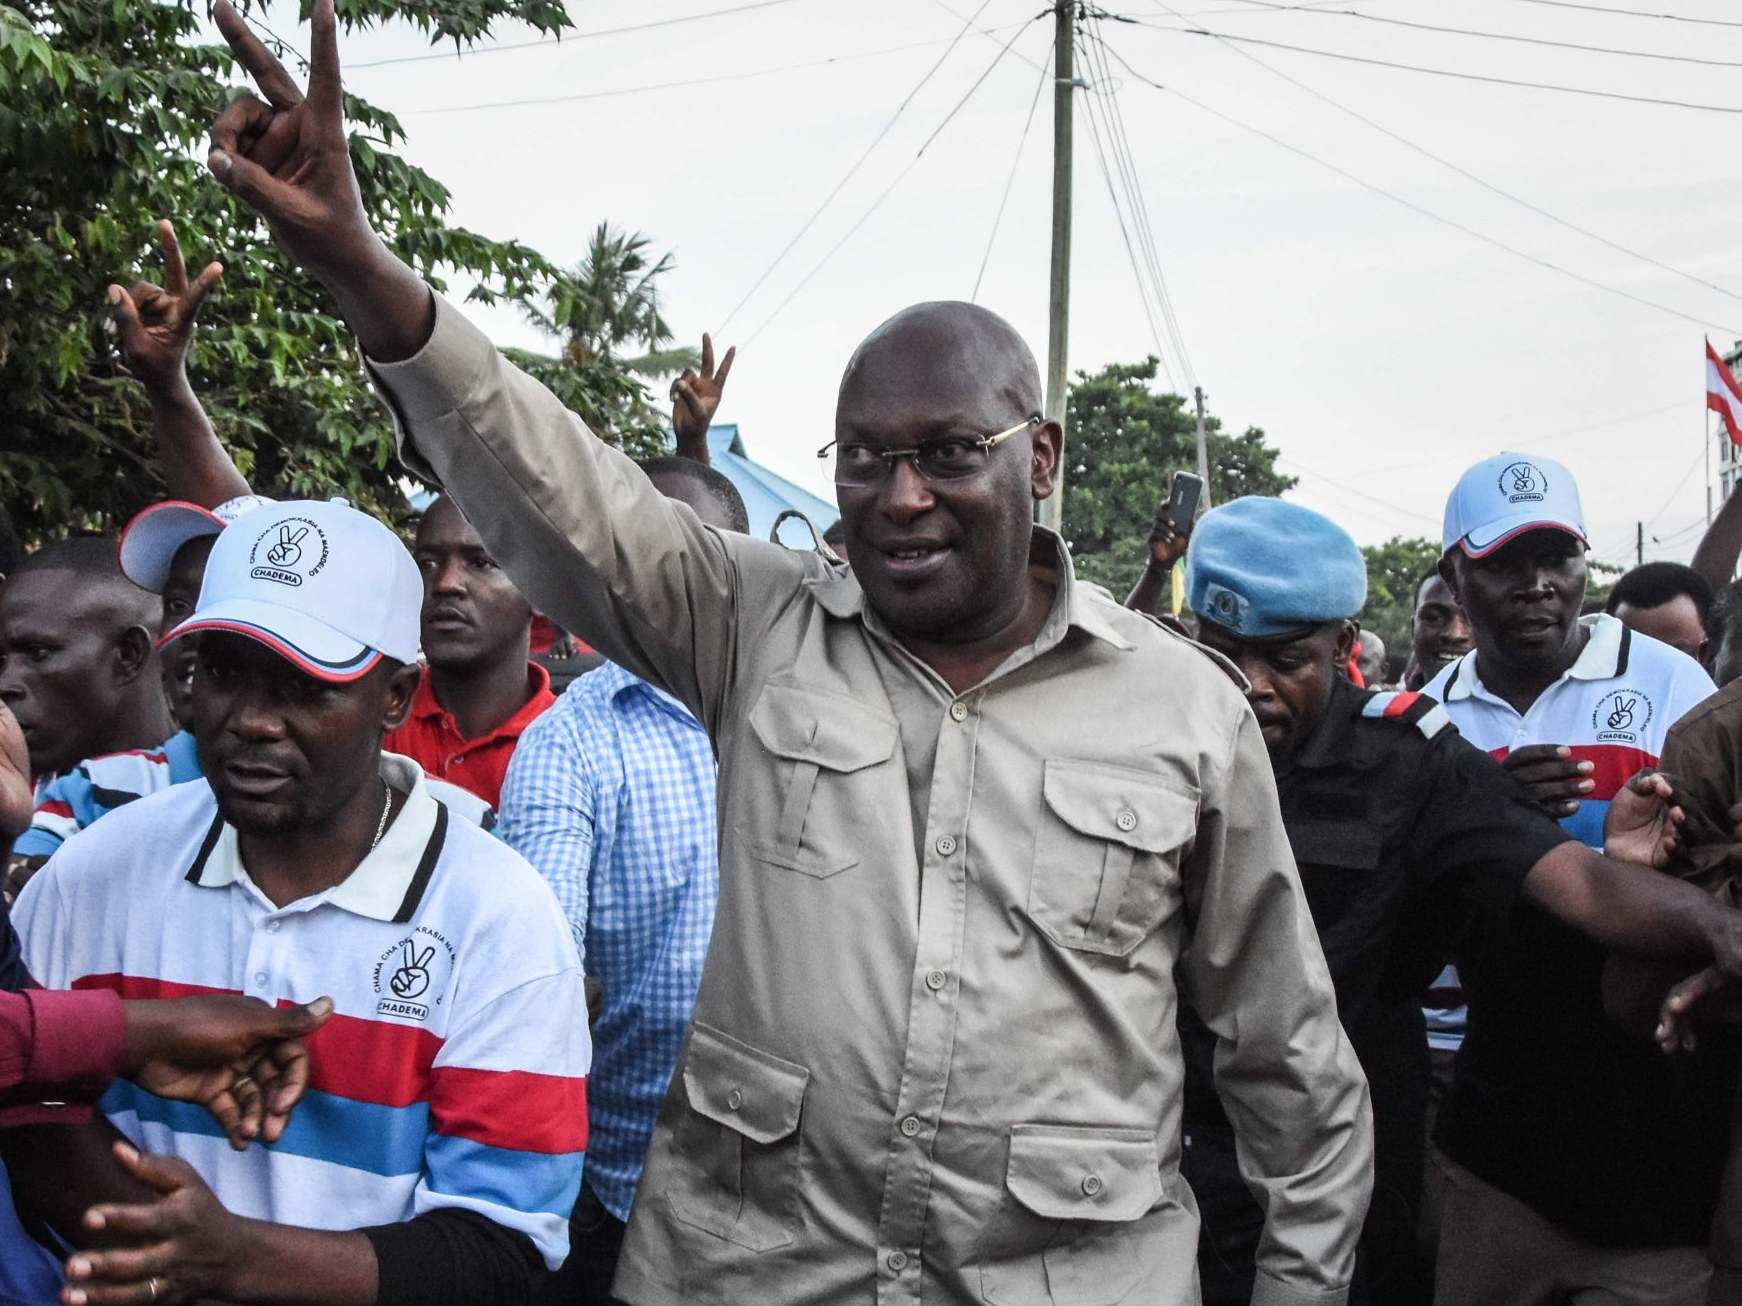 Chadema party chair Freeman Mbowe (centre) was attacked in his home